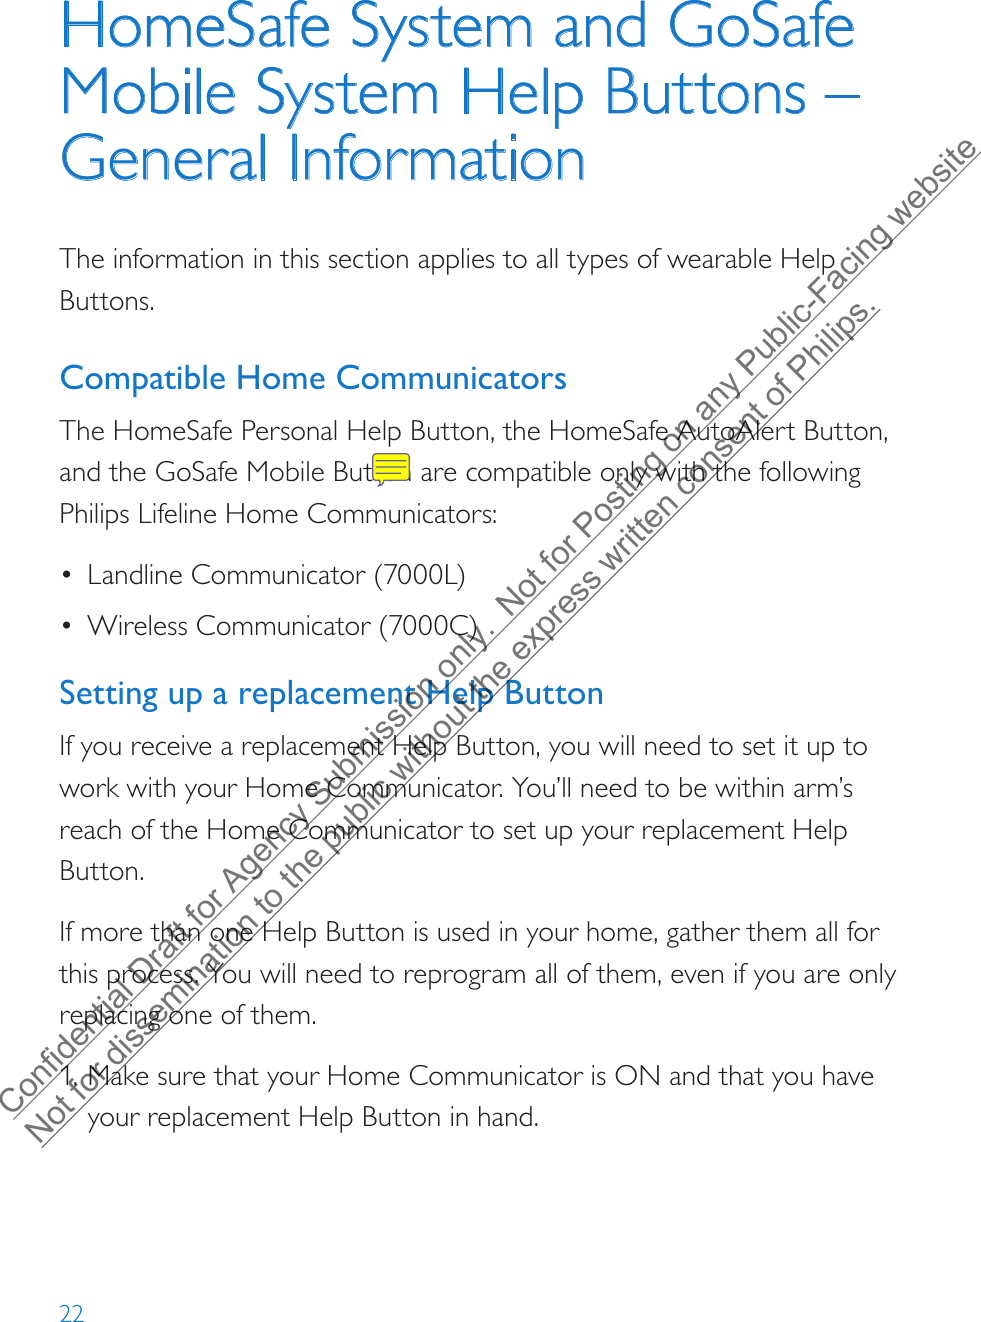 22HomeSafe System and GoSafe Mobile System Help Buttons – General InformationThe information in this section applies to all types of wearable Help Buttons. Compatible Home CommunicatorsThe HomeSafe Personal Help Button, the HomeSafe AutoAlert Button, and the GoSafe Mobile Button are compatible only with the following Philips Lifeline Home Communicators:•Landline Communicator (7000L)•Wireless Communicator (7000C)Setting up a replacement Help ButtonIf you receive a replacement Help Button, you will need to set it up to work with your Home Communicator. You’ll need to be within arm’s reach of the Home Communicator to set up your replacement Help Button.If more than one Help Button is used in your home, gather them all for this process. You will need to reprogram all of them, even if you are only replacing one of them.1. Make sure that your Home Communicator is ON and that you haveyour replacement Help Button in hand.Confidential Draft for Agency Submission only.  Not for Posting on any Public-Facing website Not for dissemination to the public without the express written consent of Philips.  